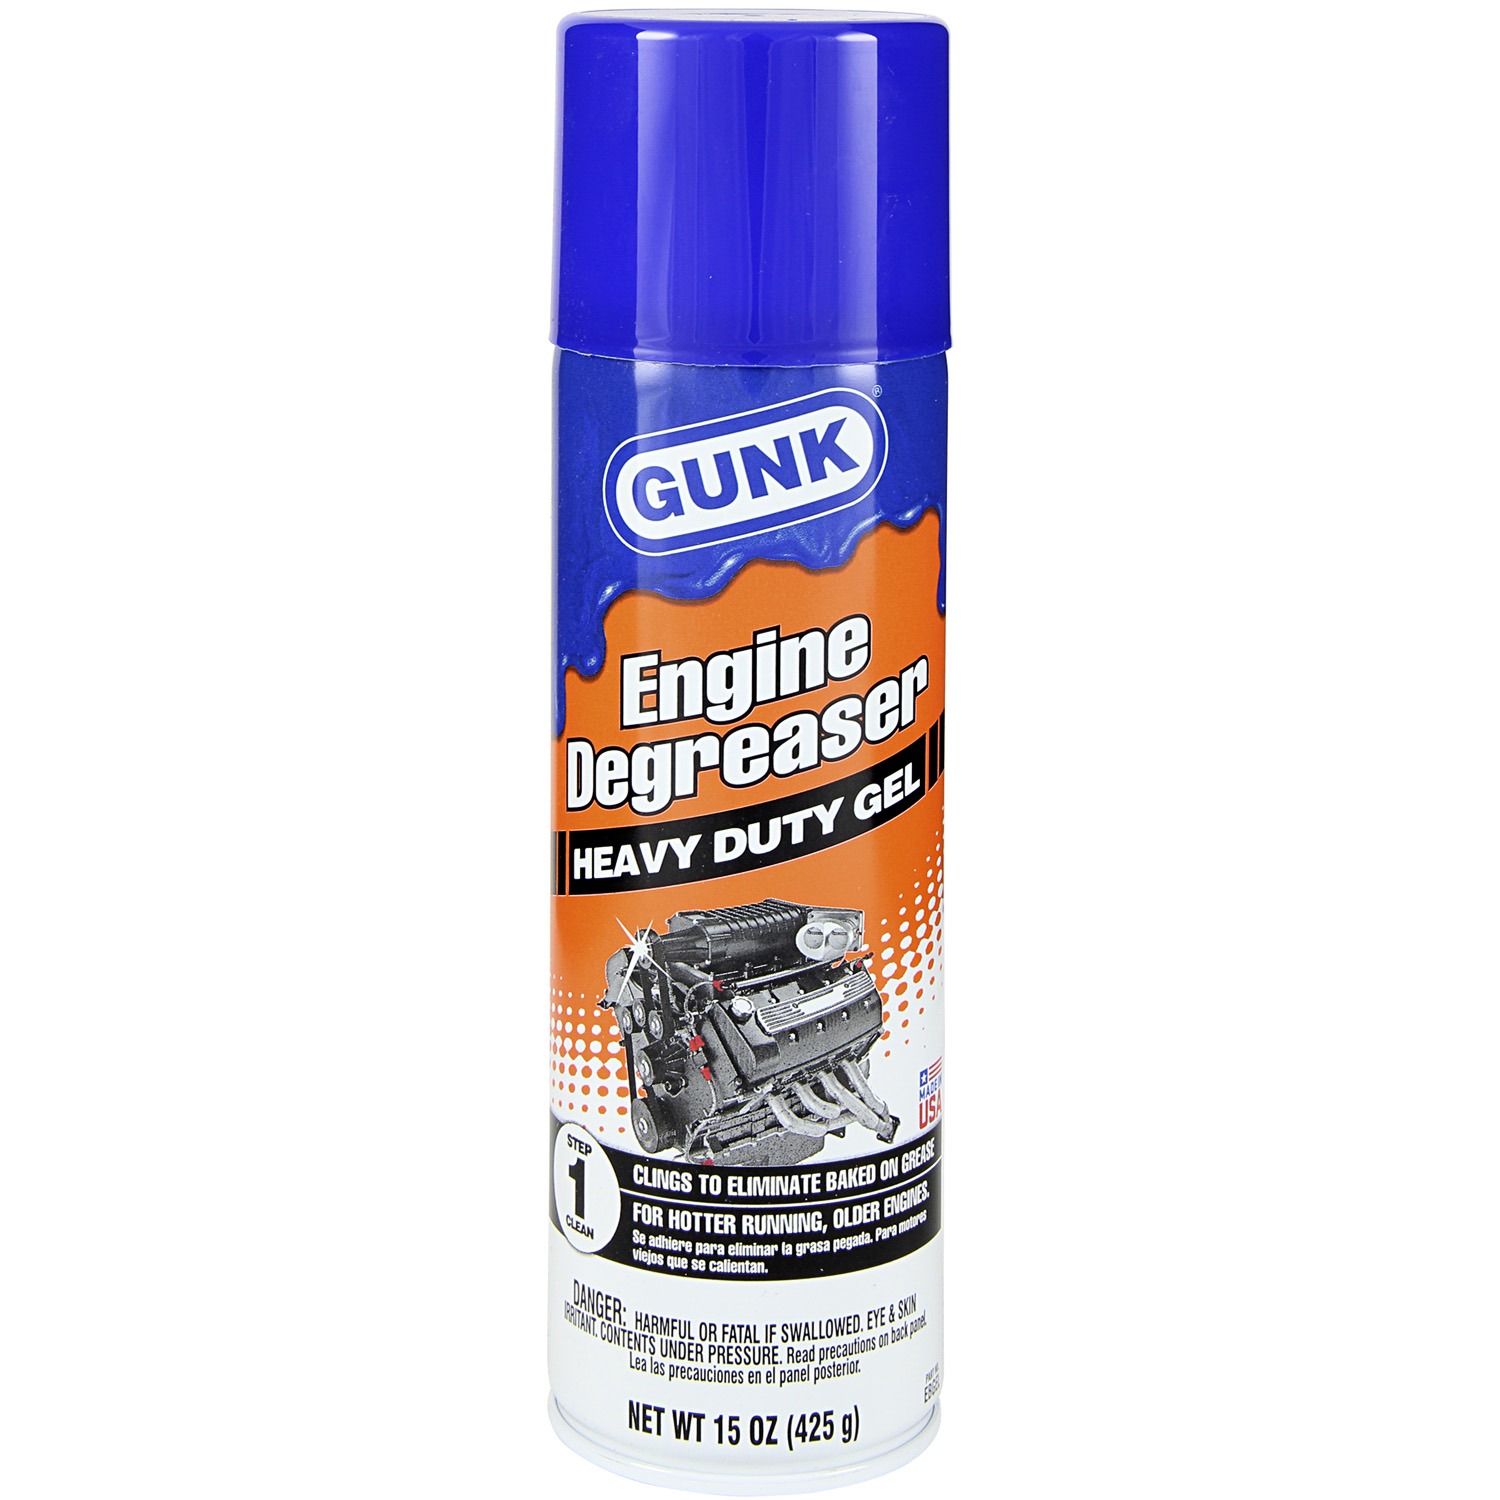 Gunk like cleaners that do NOT ruin triumph black textured engine paint?